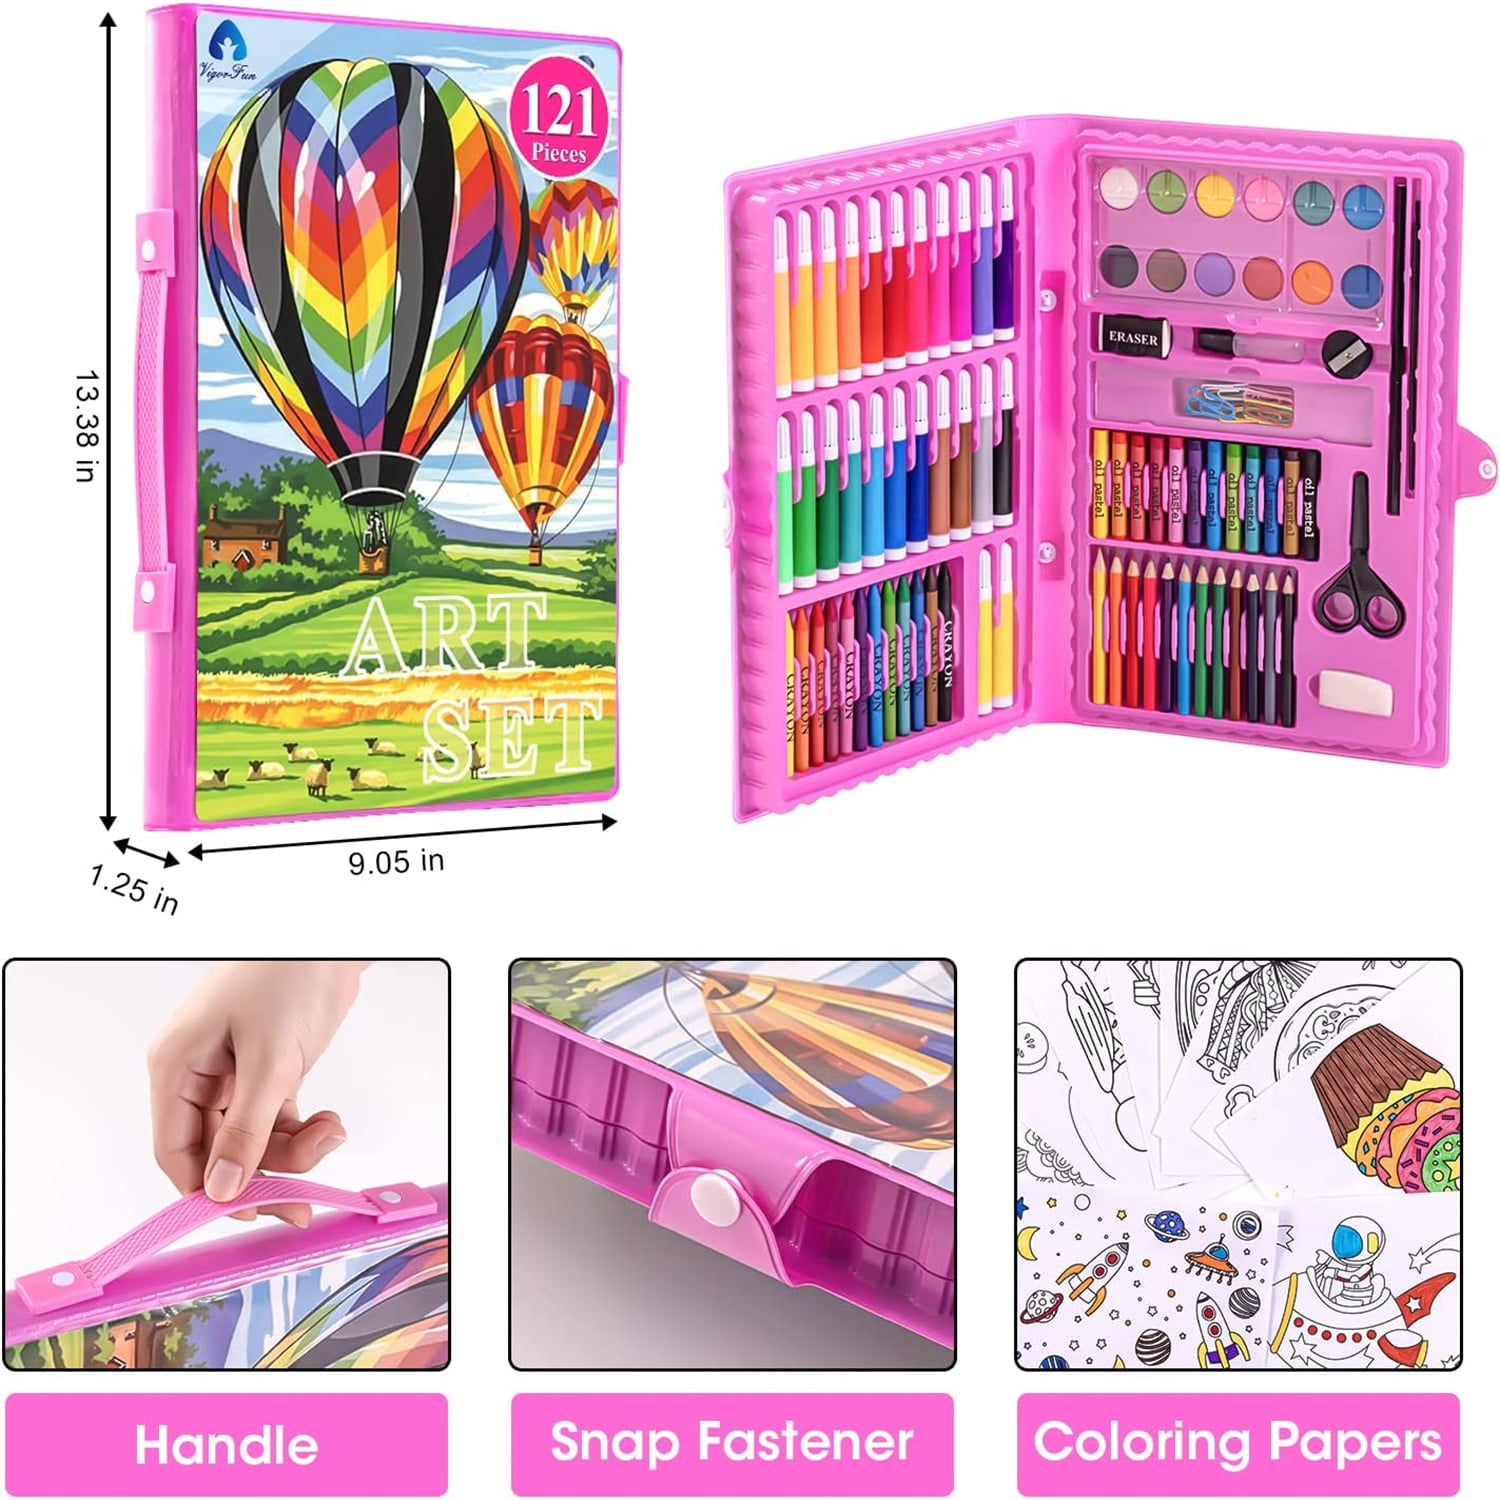  VigorFun Art Supplies, 240-Piece Drawing Art Kit, Gifts for  Girls Boys Teens, Art Set Crafts Case with Double Sided Trifold Easel,  Includes Sketch Pads, Oil Pastels, Crayons, Colored Pencils (Pink)